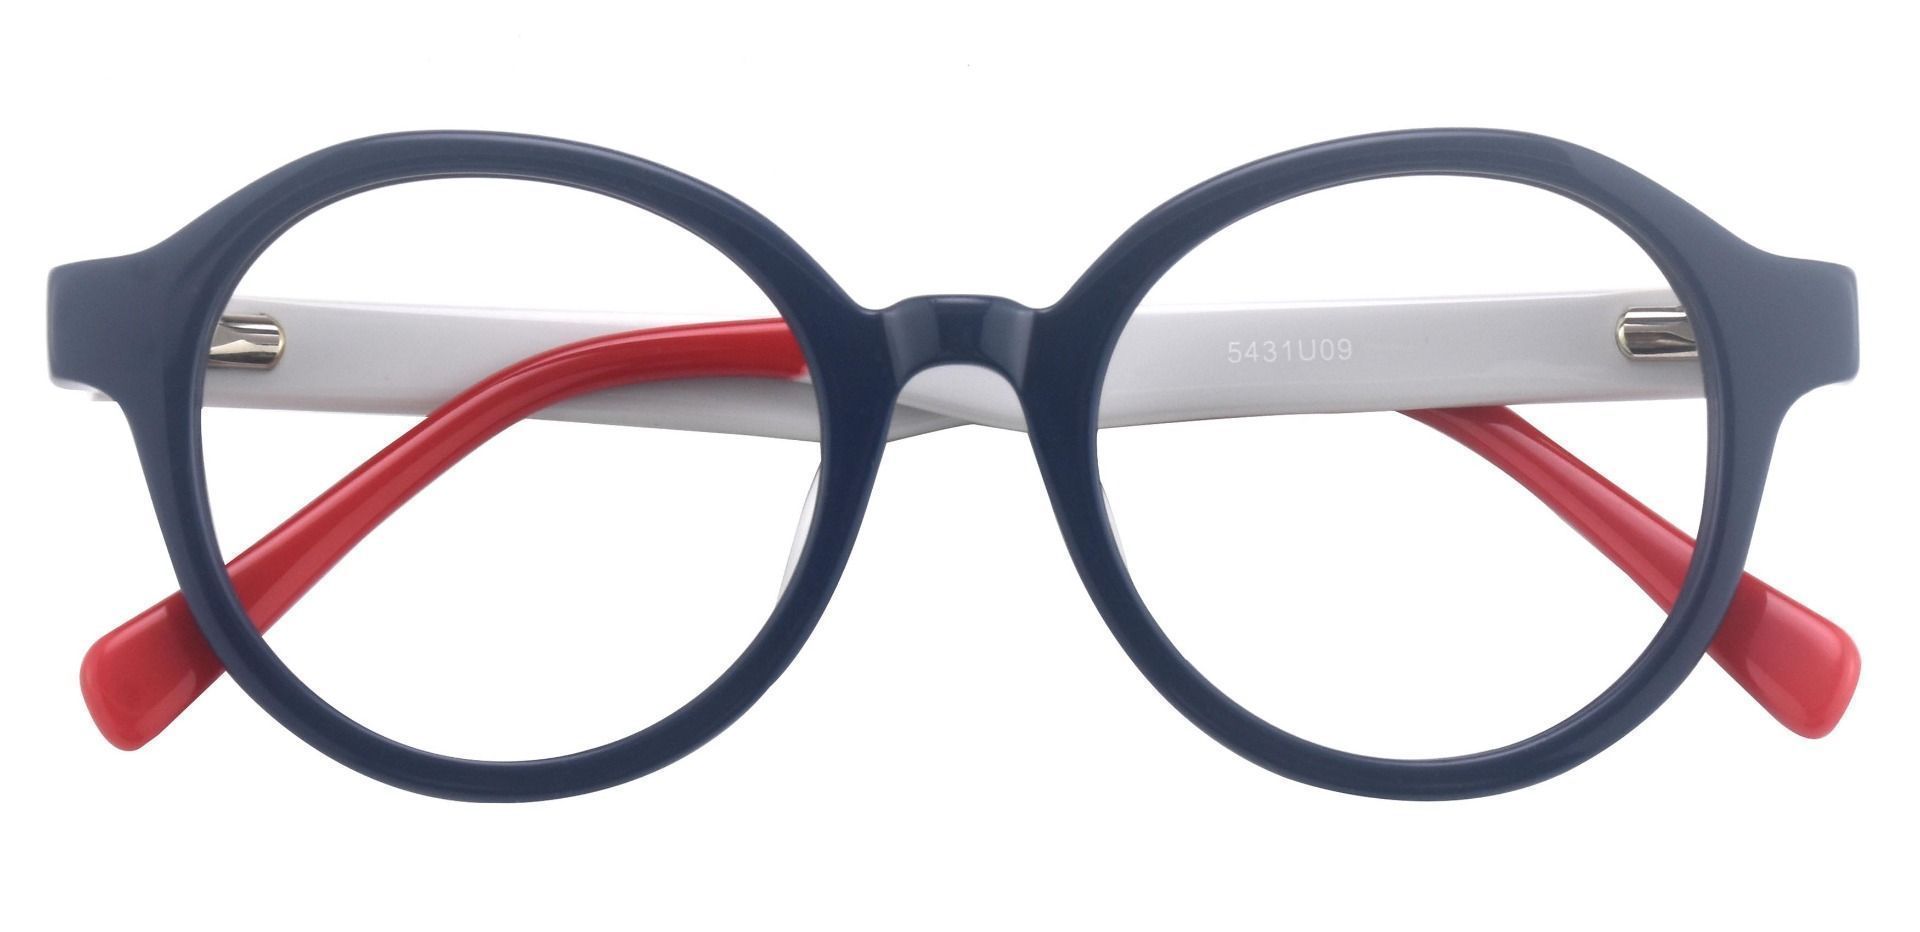 Roxbury Round Prescription Glasses - The Frame Is Blue And Red